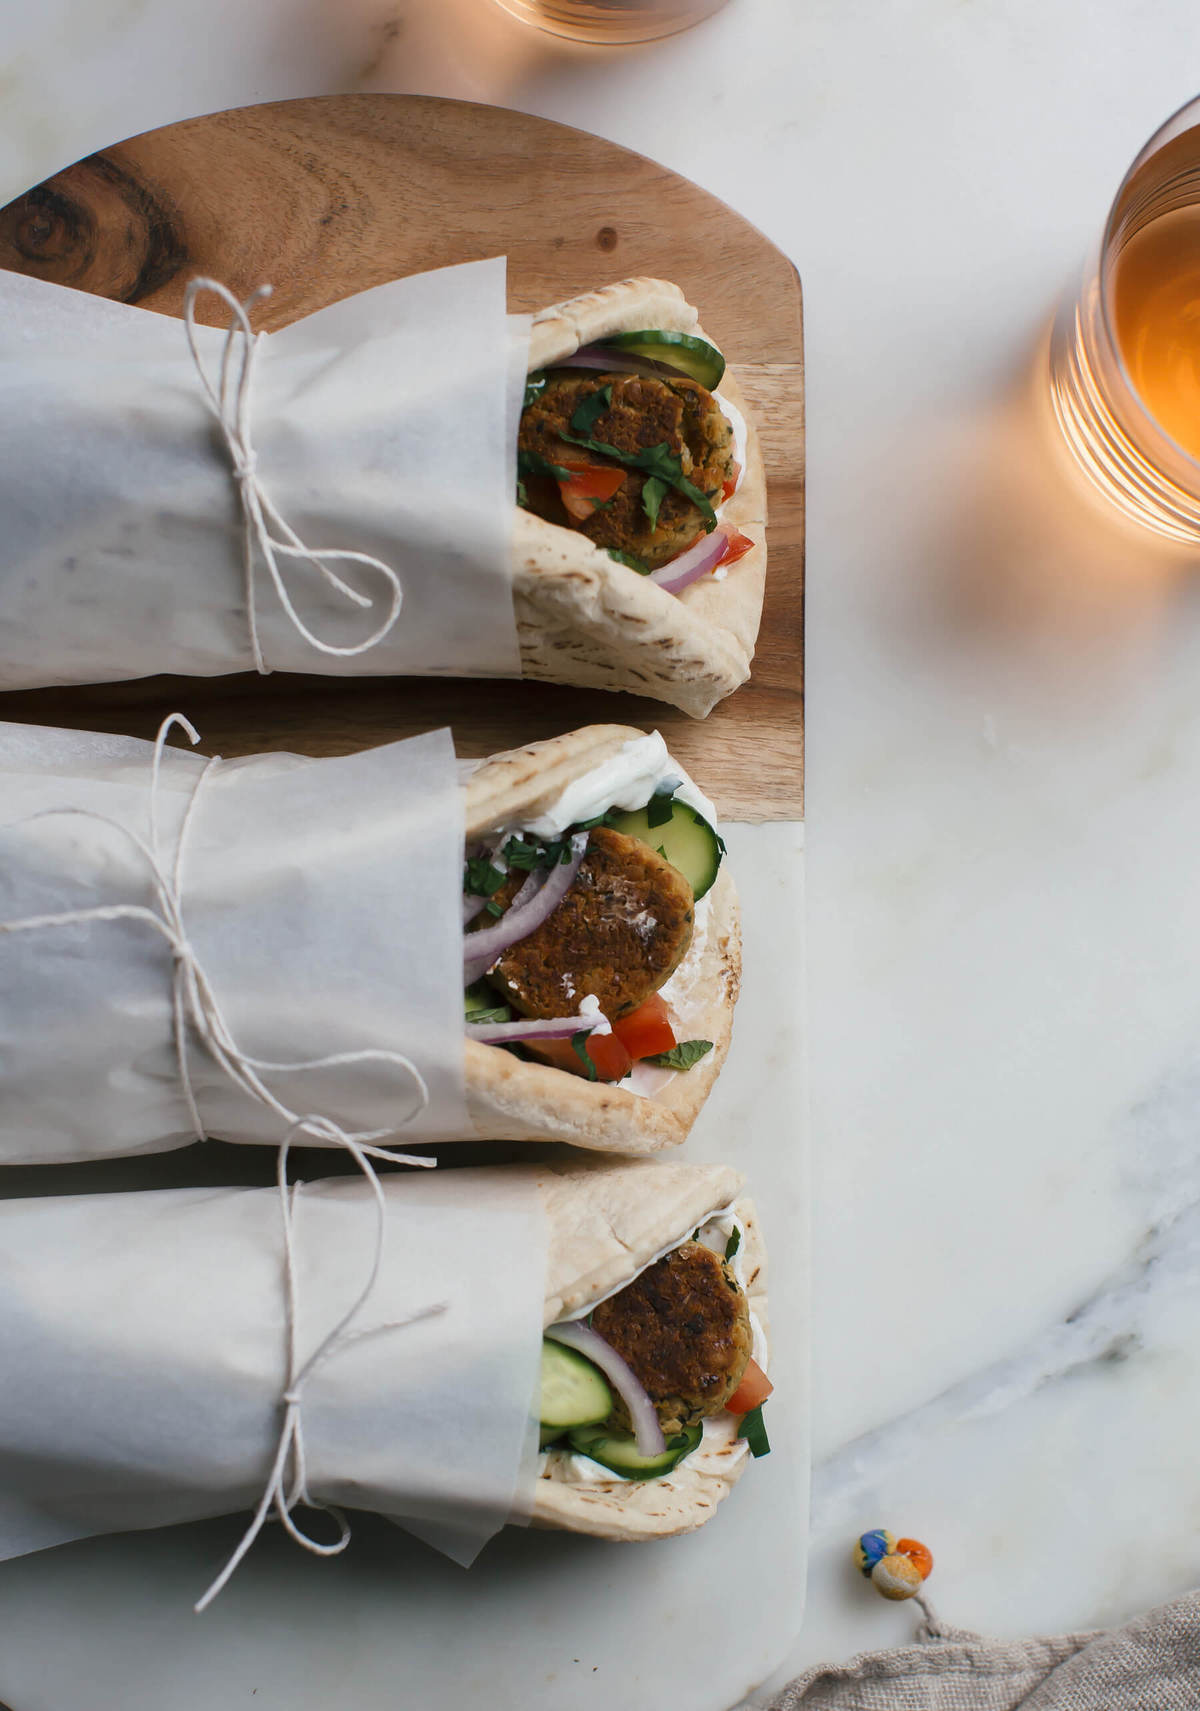 Baked Falafel Wraps with Garlic-y Labneh and Lots of Herbs